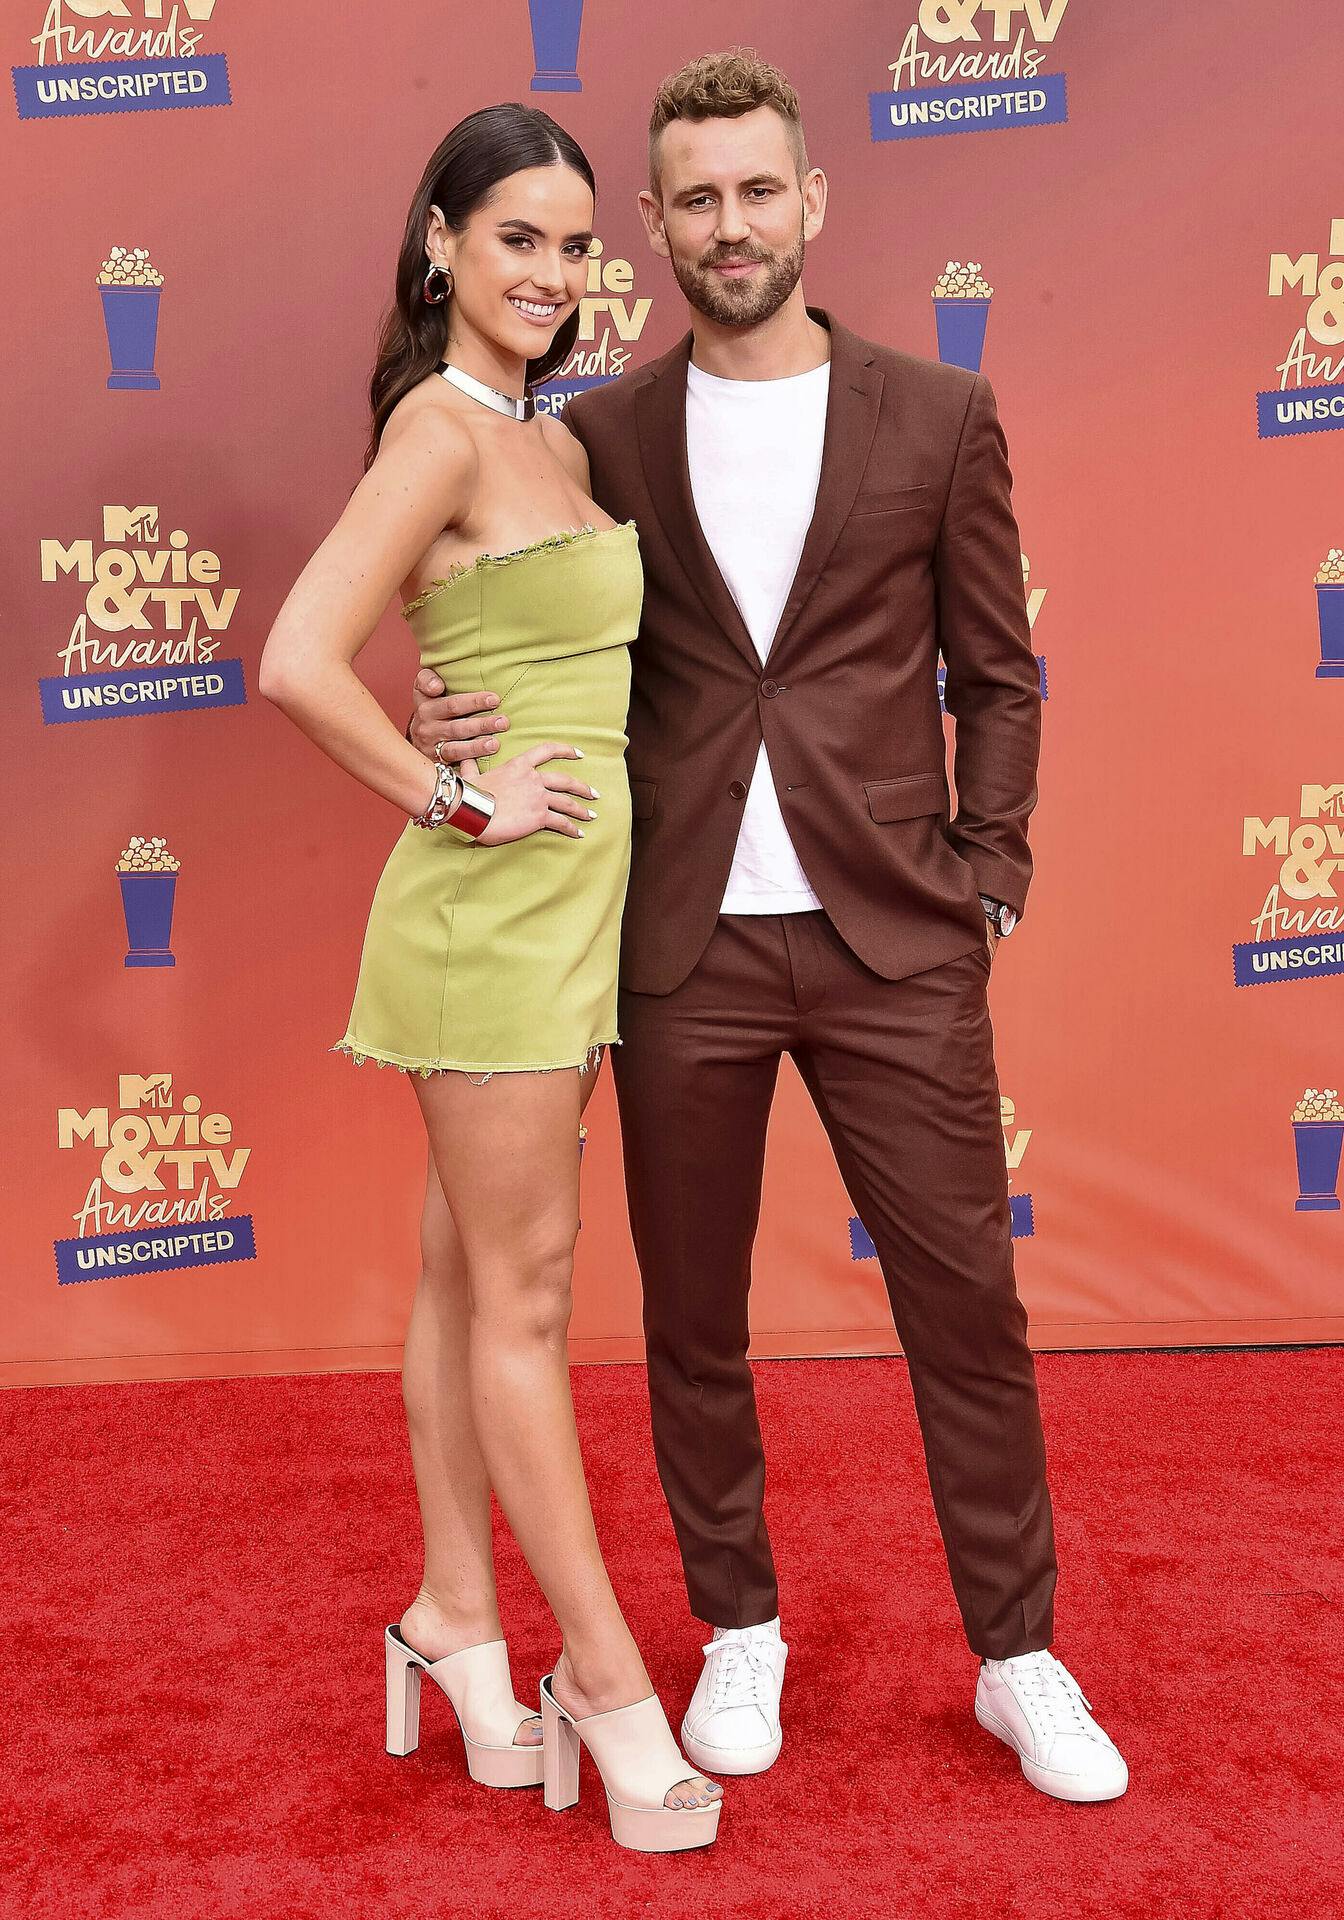 Natalie Joy and Nick Viall attend the 2022 MTV Movie and TV Awards: UNSCRIPTED at Barker Hangar in Santa Monica, Los Angeles, USA, on 02 June 2022. Photo by: Hubert Boesl/picture-alliance/dpa/AP Images